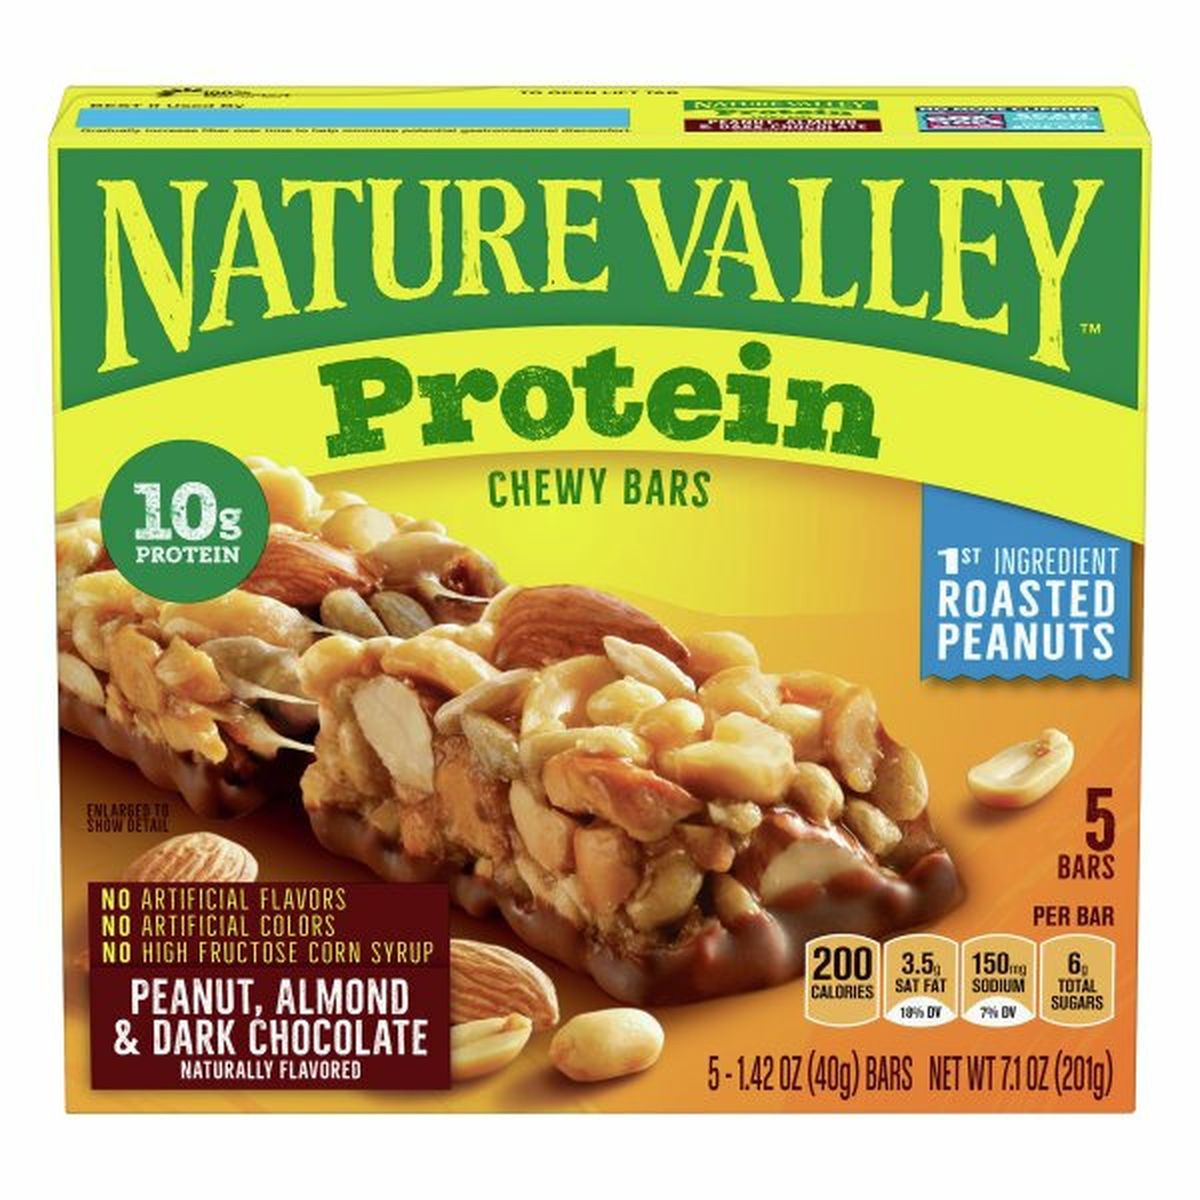 Calories in Nature Valley Chewy Bars, Protein, Peanut, Almond & Dark Chocolate, 5 Pack